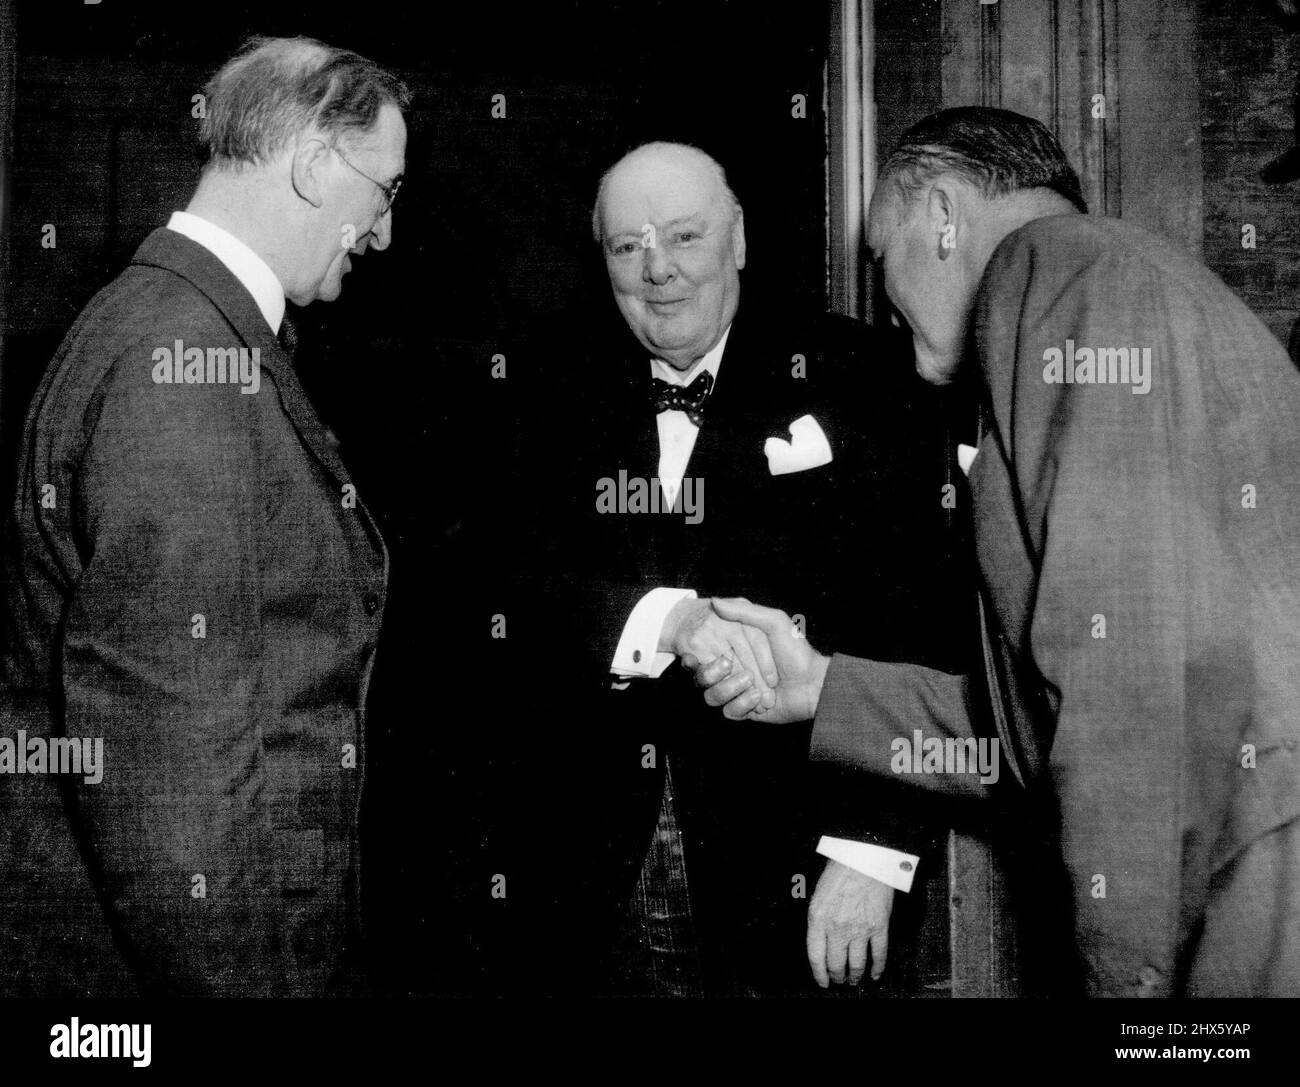 De Valera Lunches With Sir Winston Irish Prime Minister Eamon de Valera lunched with British Prime Minister, Sir Winston Churchill at number ten Downing street today September 16th. Sir Winston Churchill (centre), greets Eamon de Valera (left), and Frank Aiken the Irish Foreign Minister (right), as they arrived at number ten downing street for lunch today September. November 01, 1953. (Photo by Associated Press Photo).;De Valera Lunches With Sir Winston Irish Prime Minister Eamon de Valera lunch Stock Photo